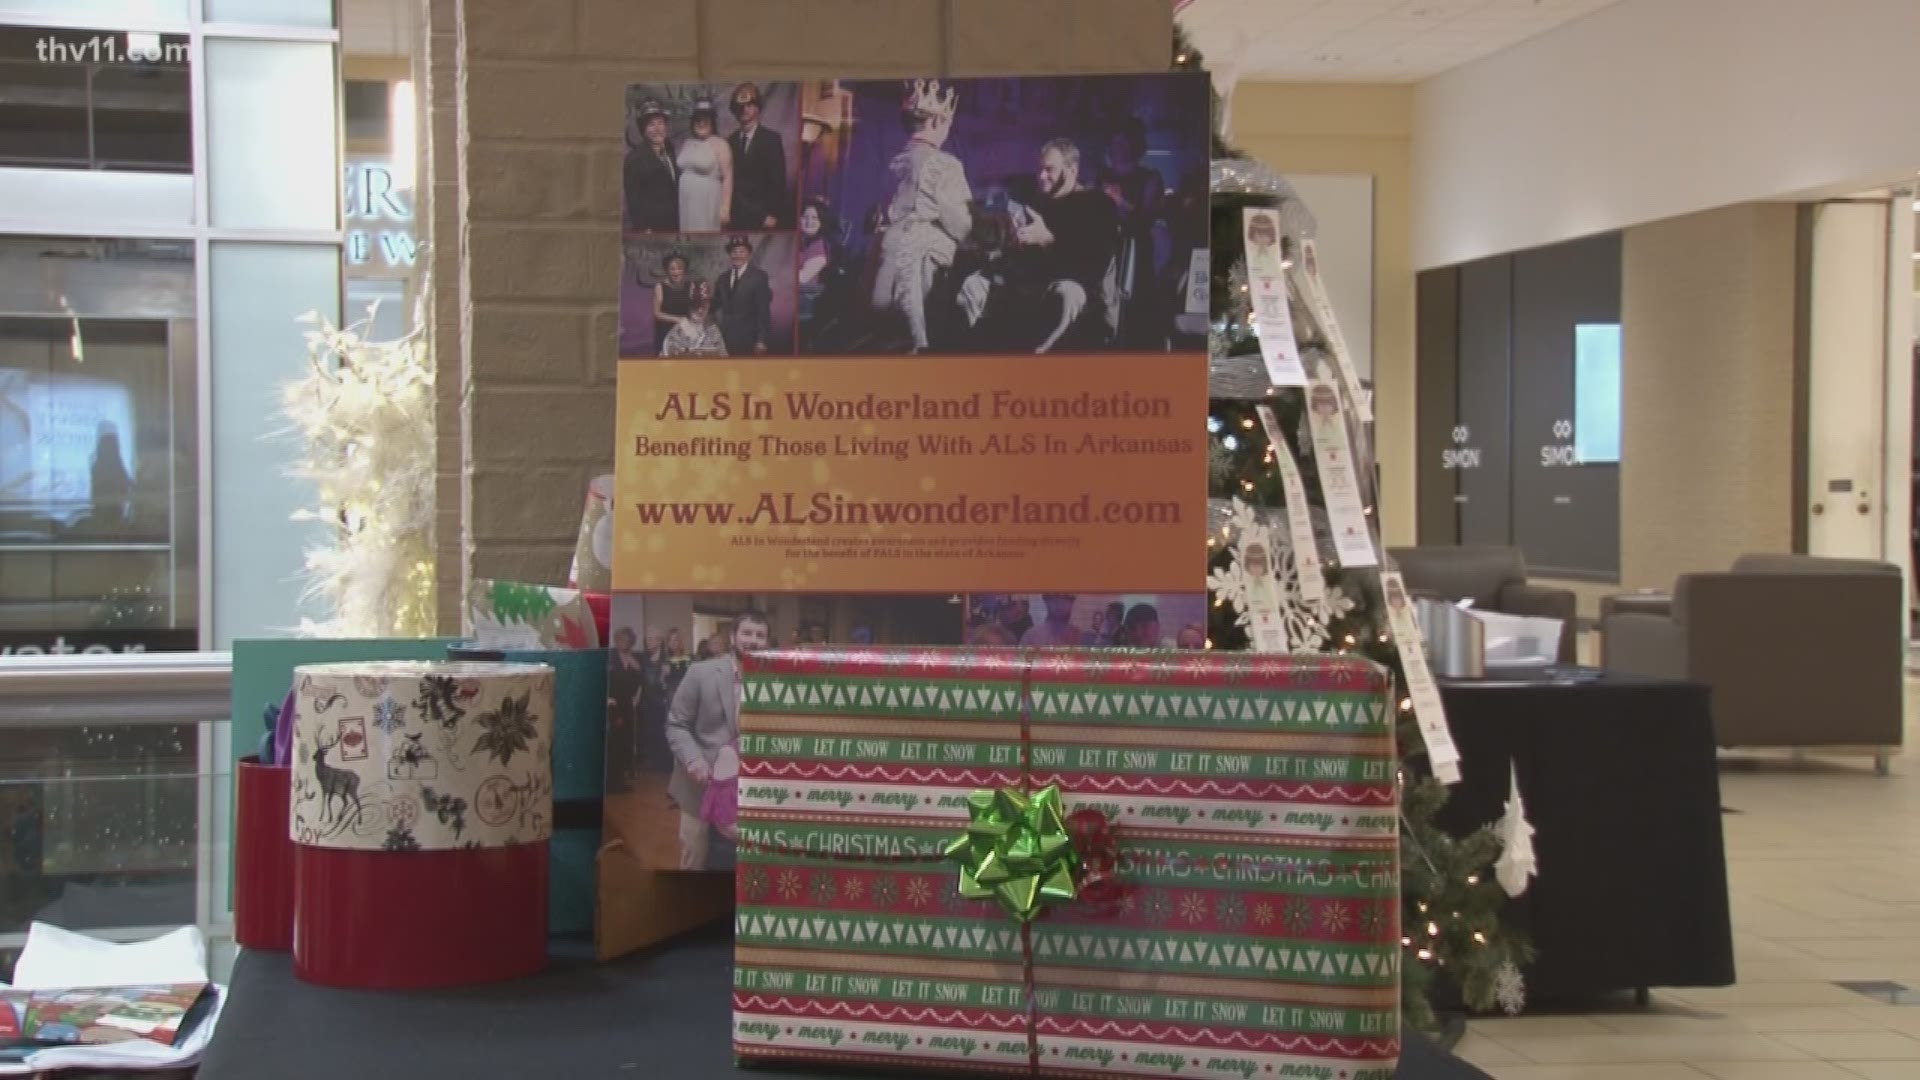 If you need to get some of your own Christmas gifts wrapped, you have a chance to help out people suffering from ALS at the same time.